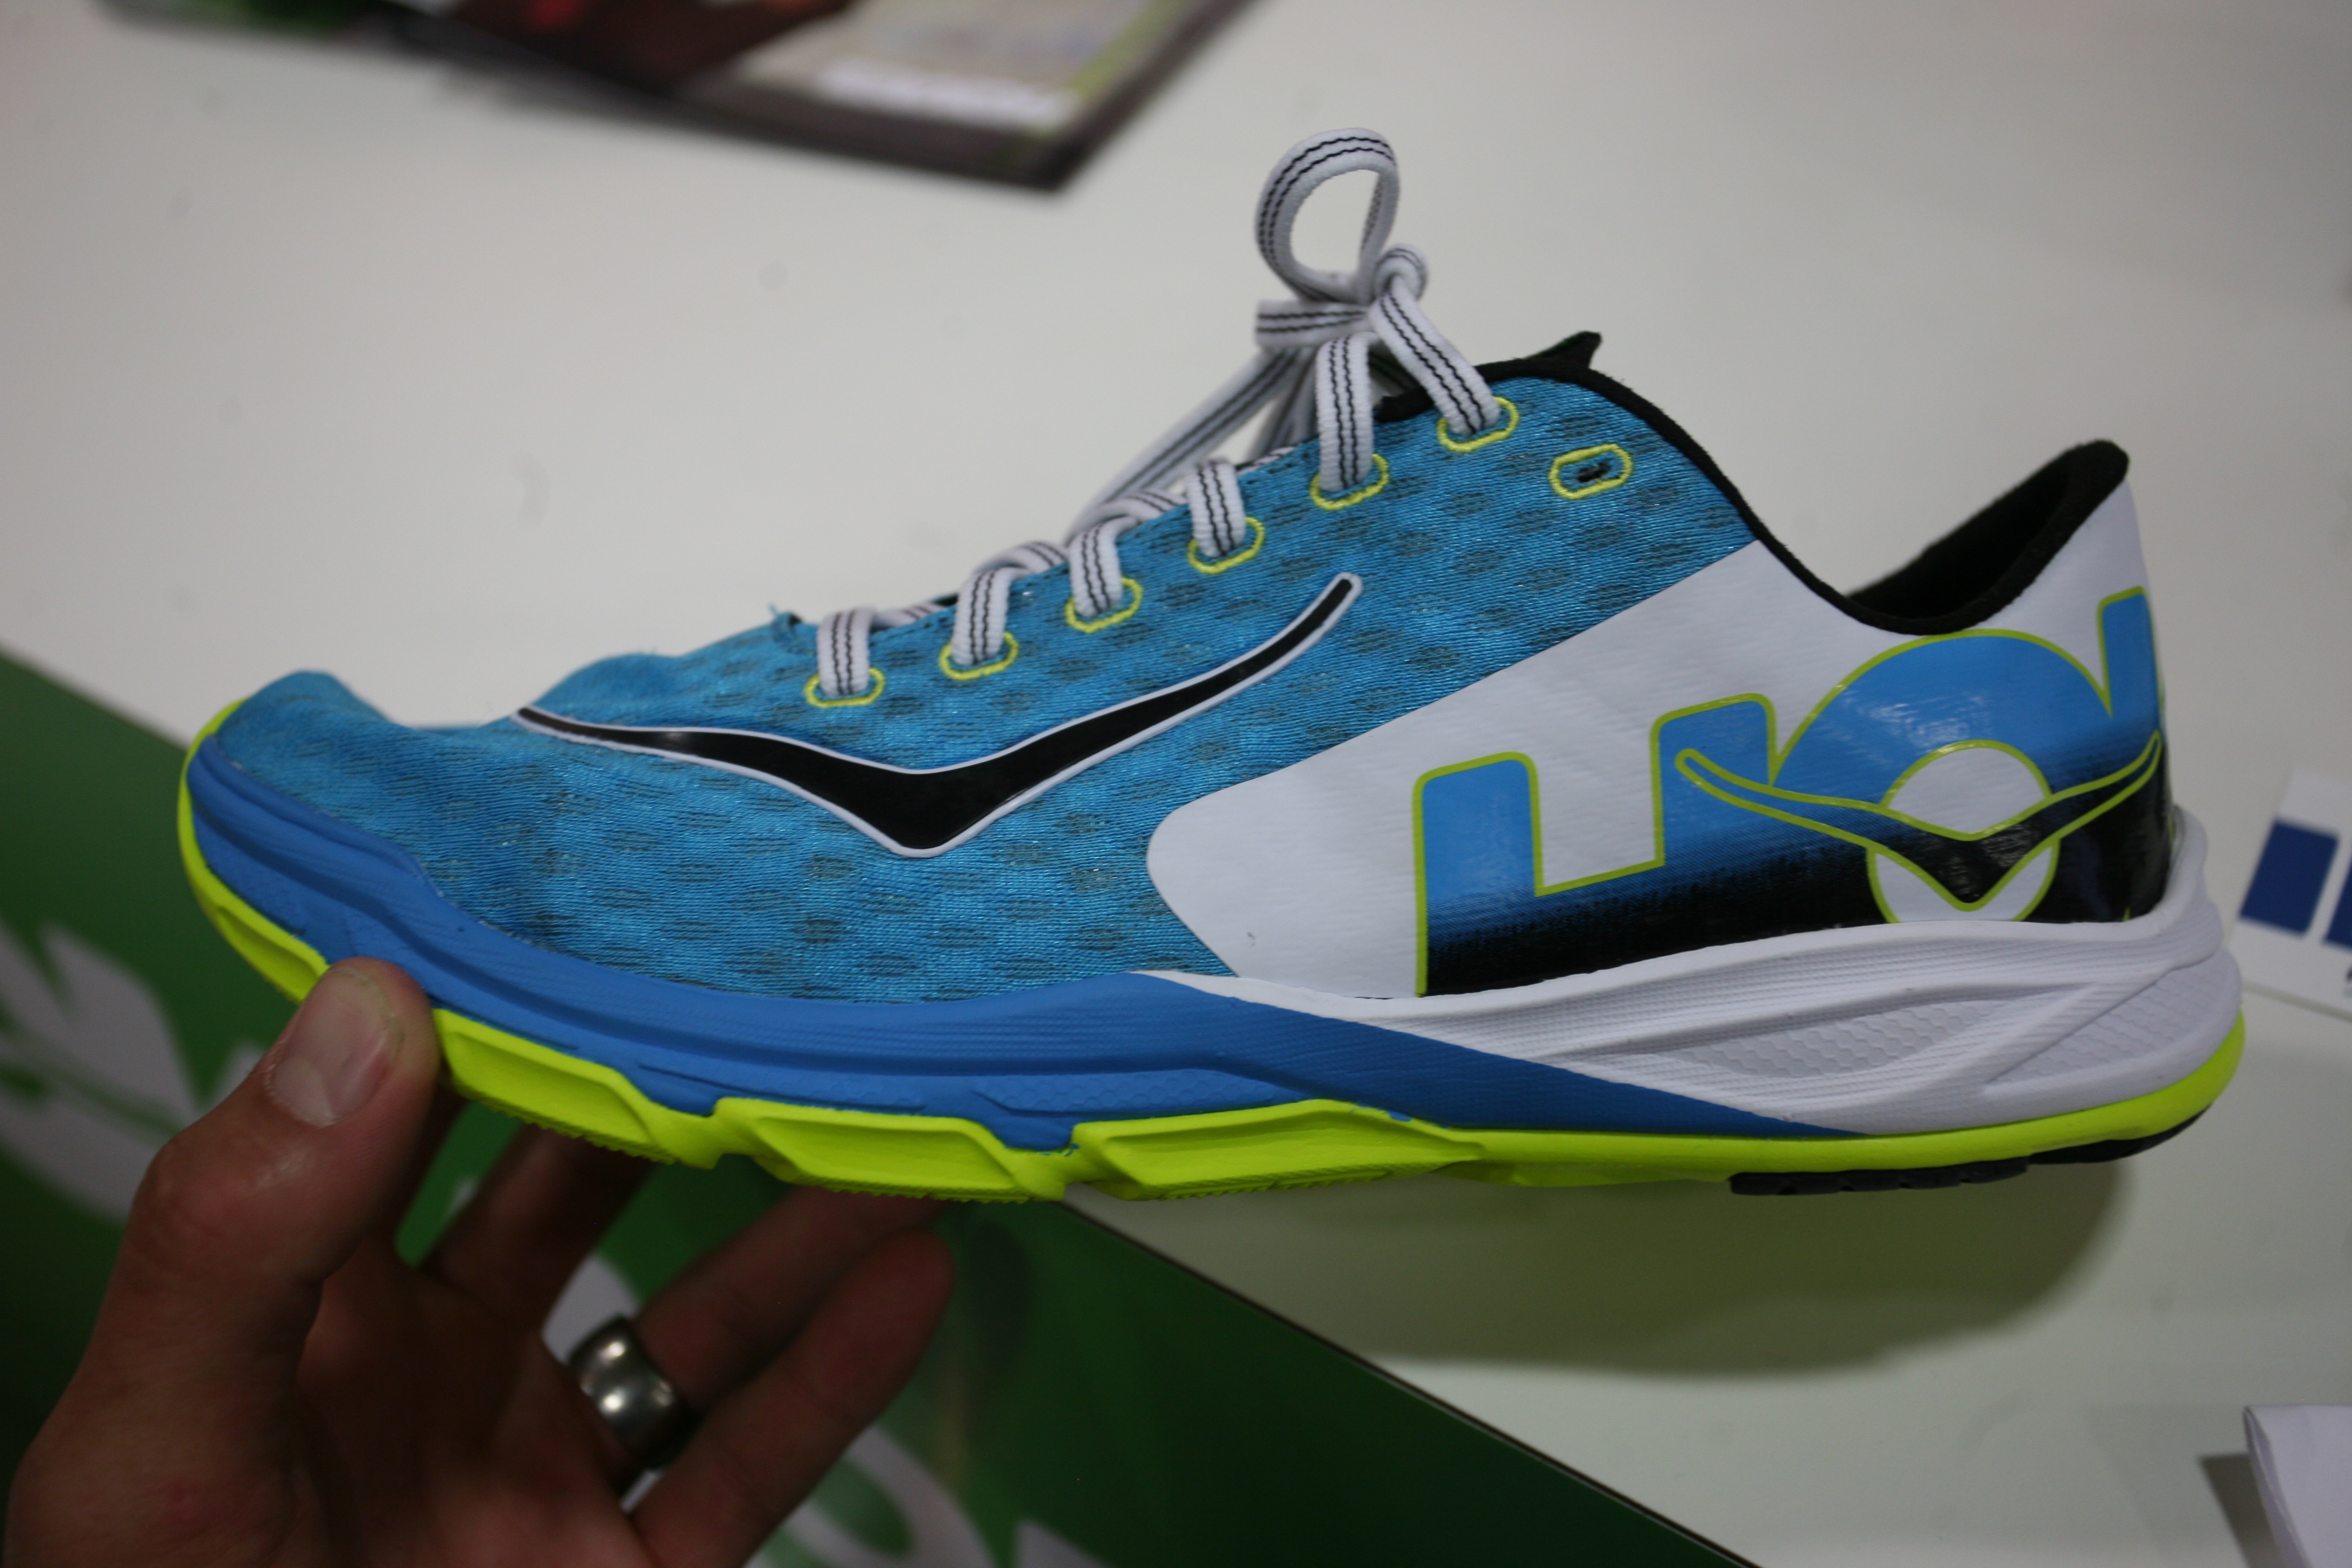 New Shoe Roundup Road Racing Shoes Coming in 2016